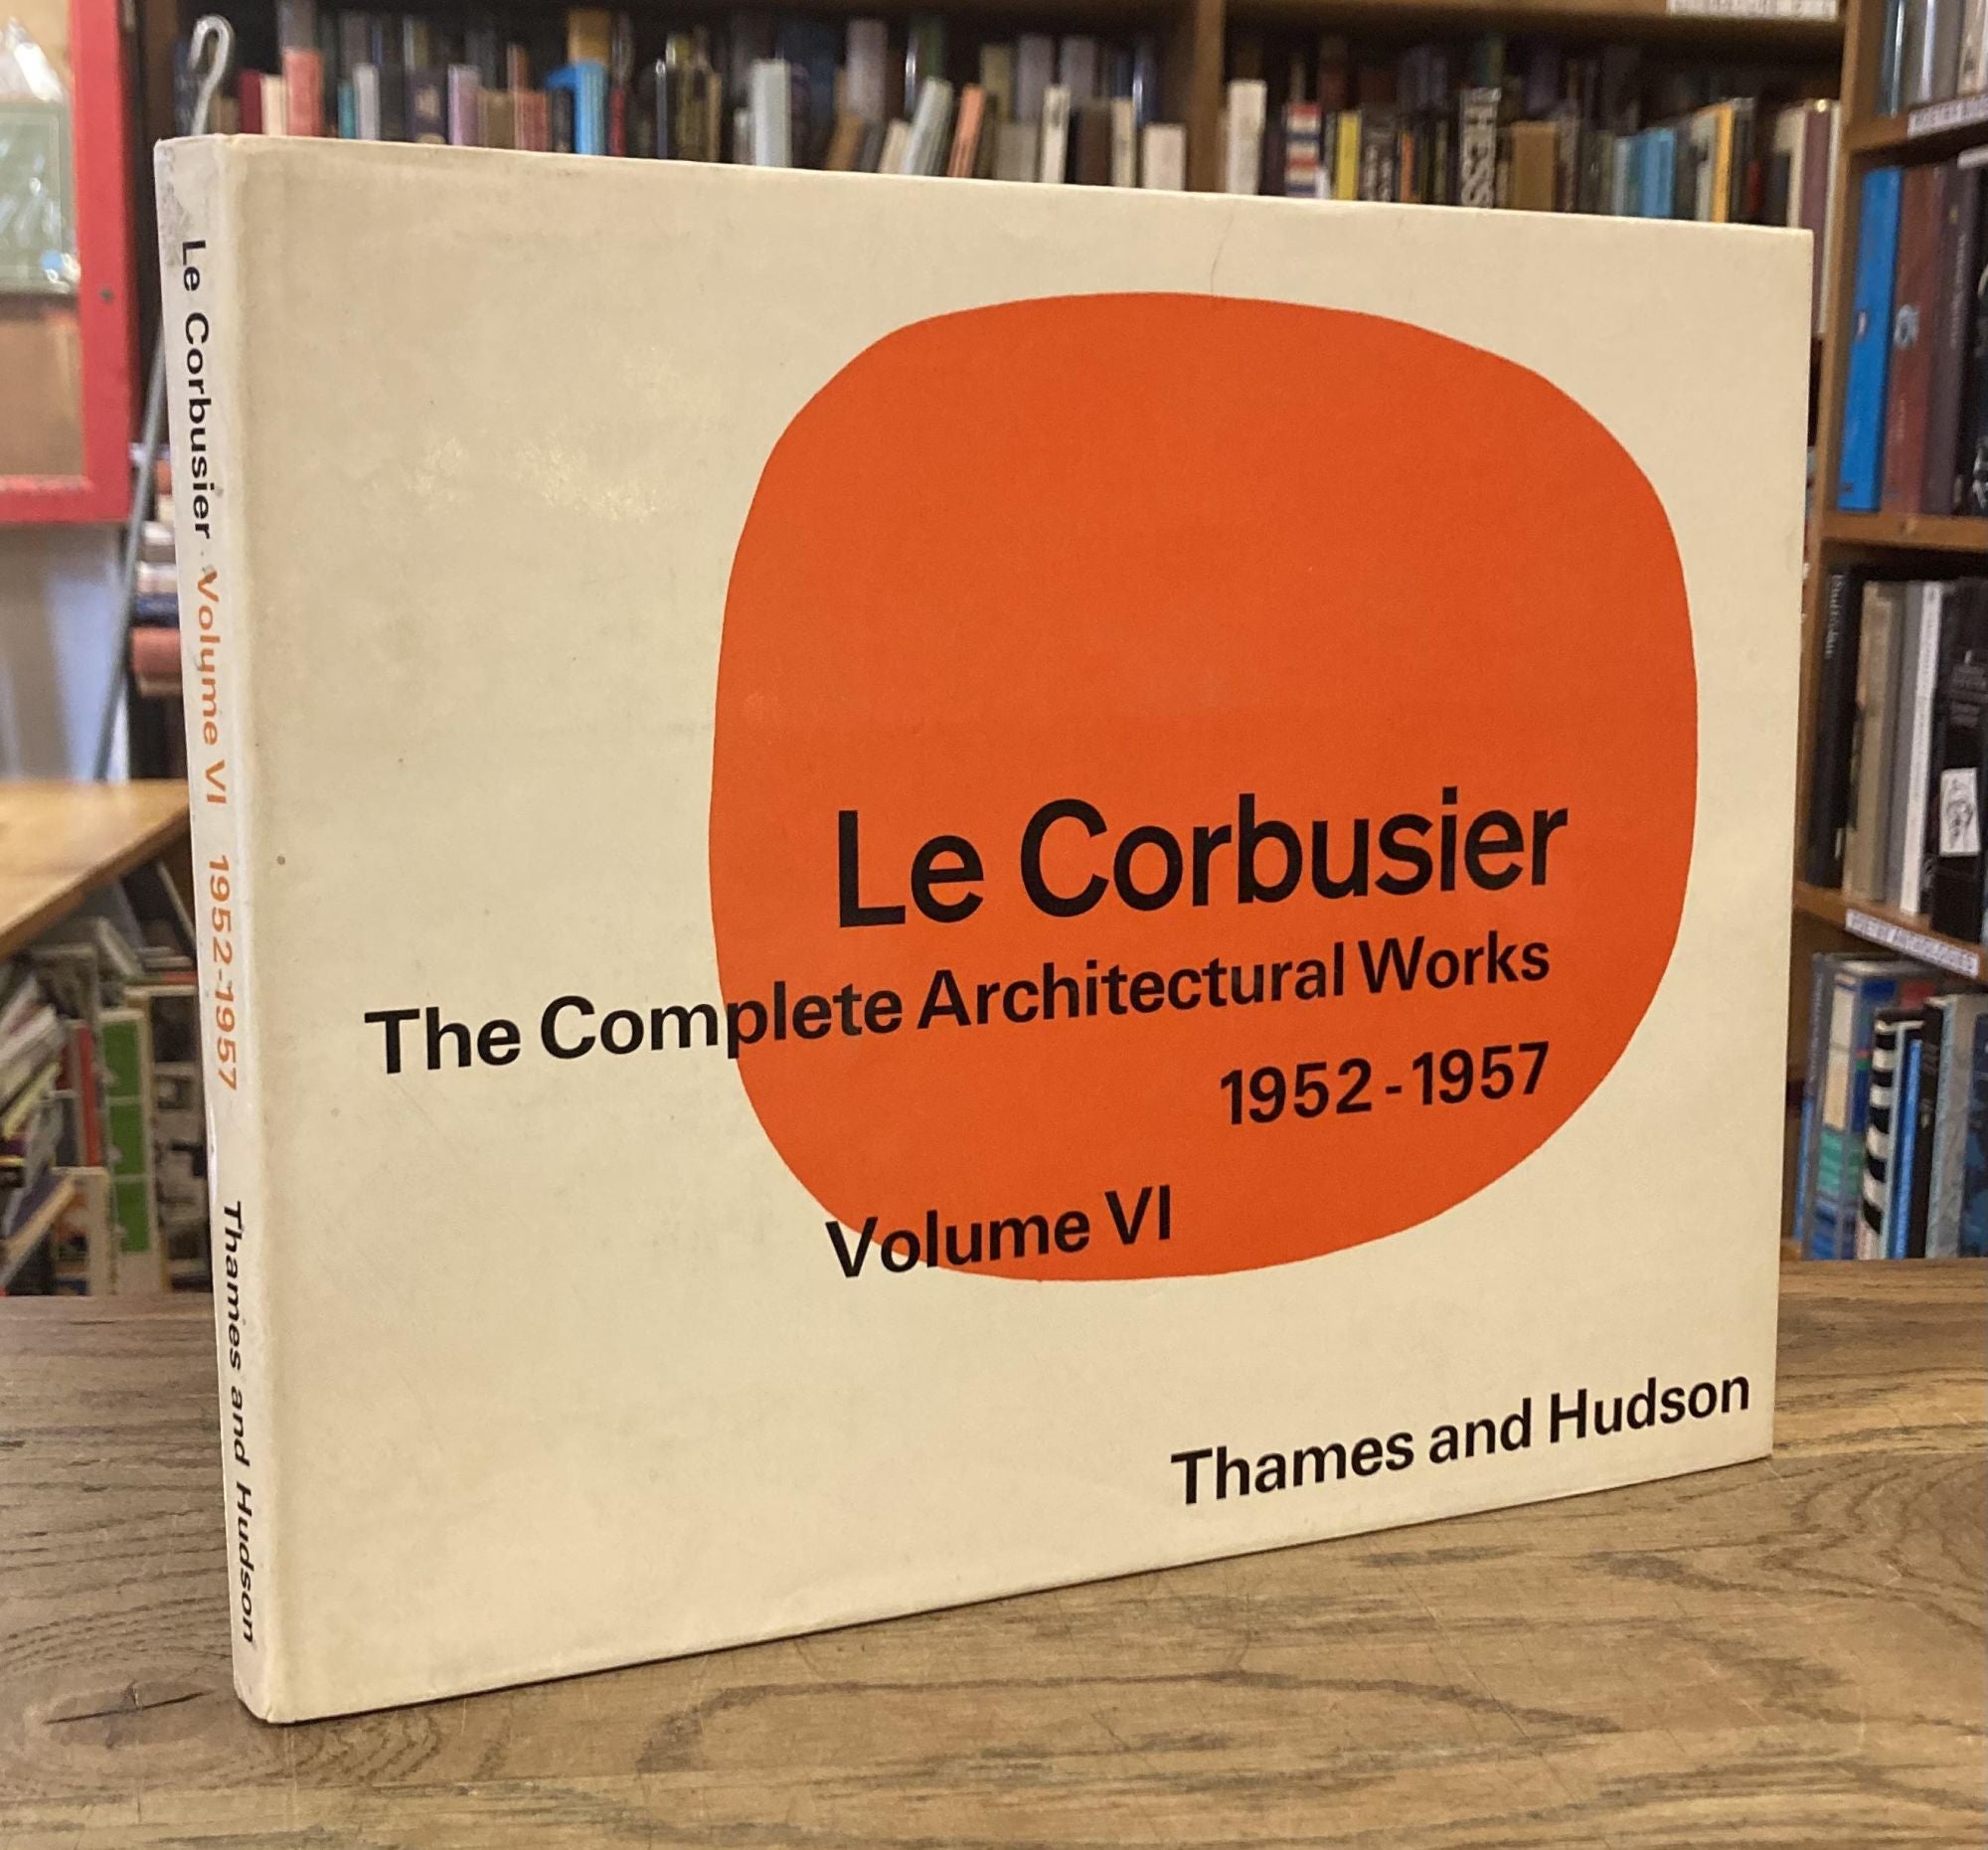 Le Corbusier and his studio rue de Sevres 35 _ The Complete Architectural  Works Volume VI 1952-1957 by W. Boesiger on San Francisco Book Company